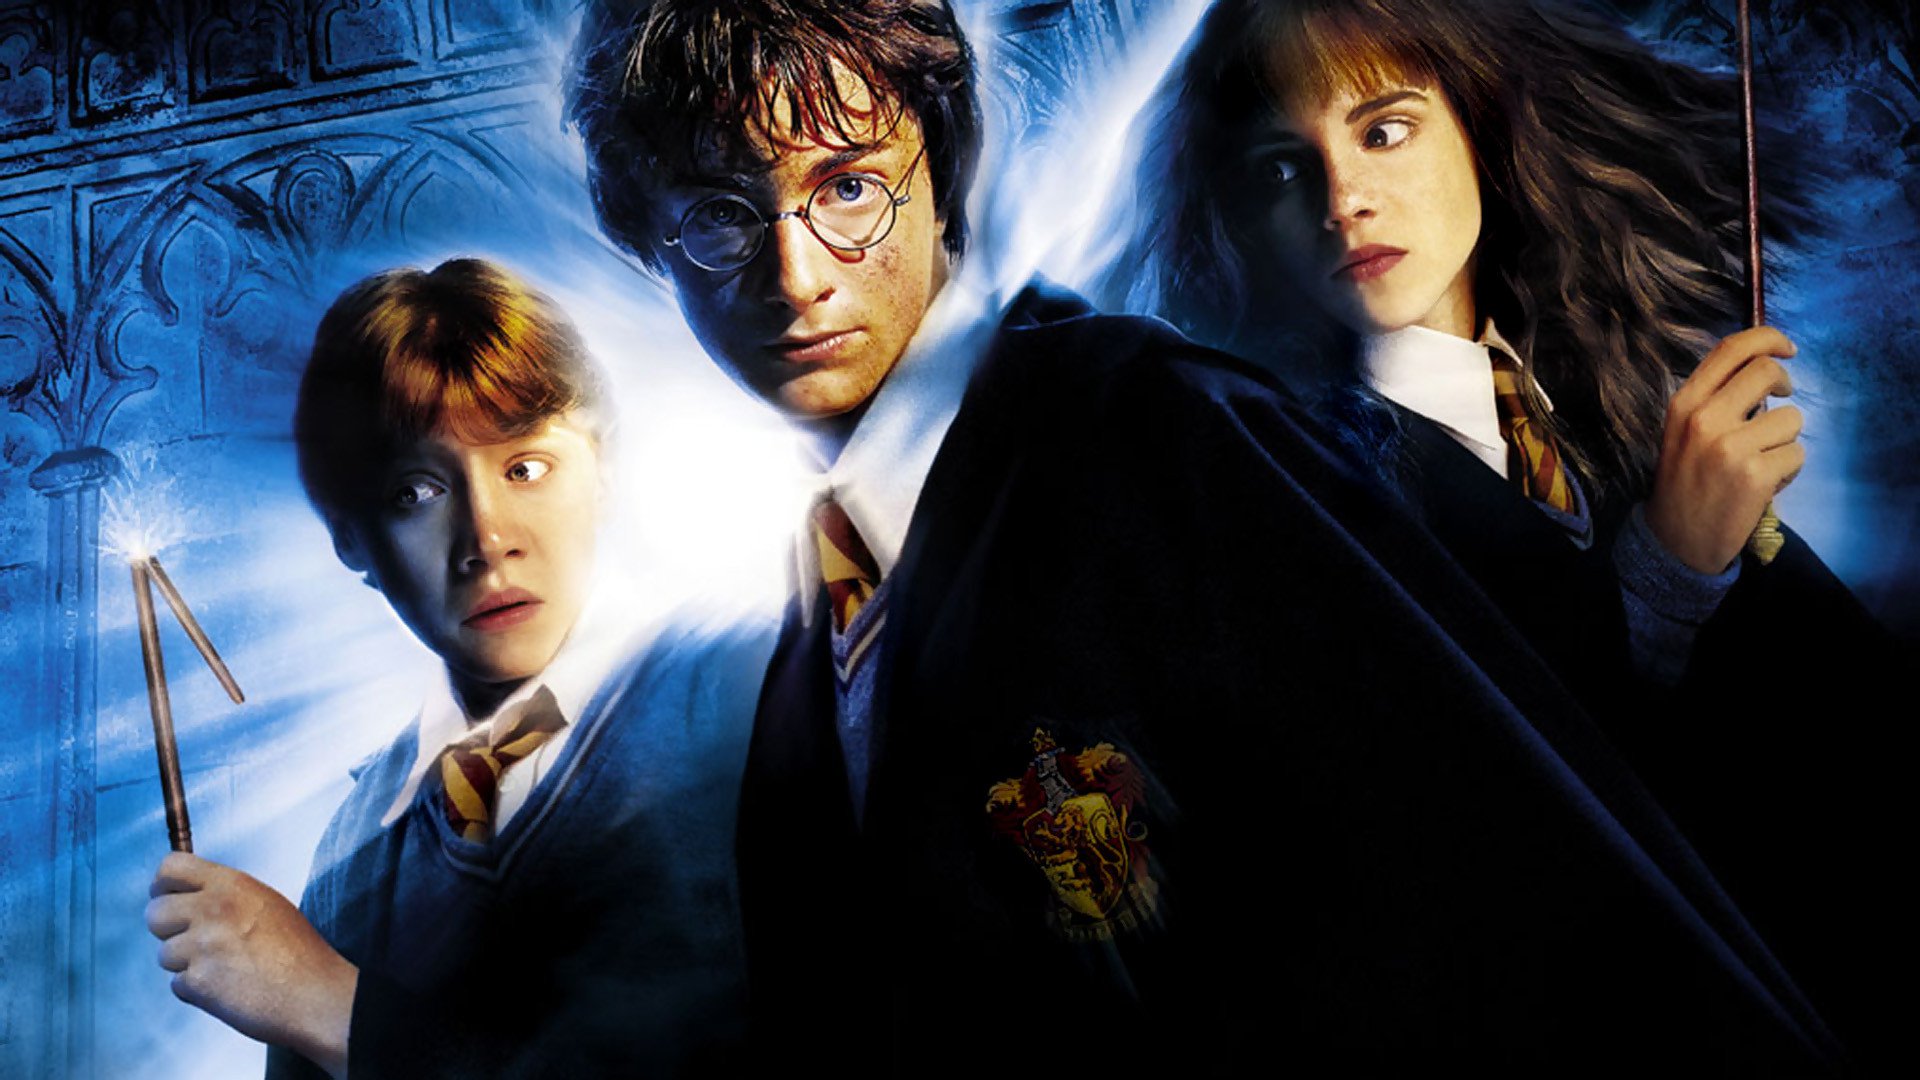 Movie Harry Potter and the Chamber of Secrets HD Wallpaper | Background Image